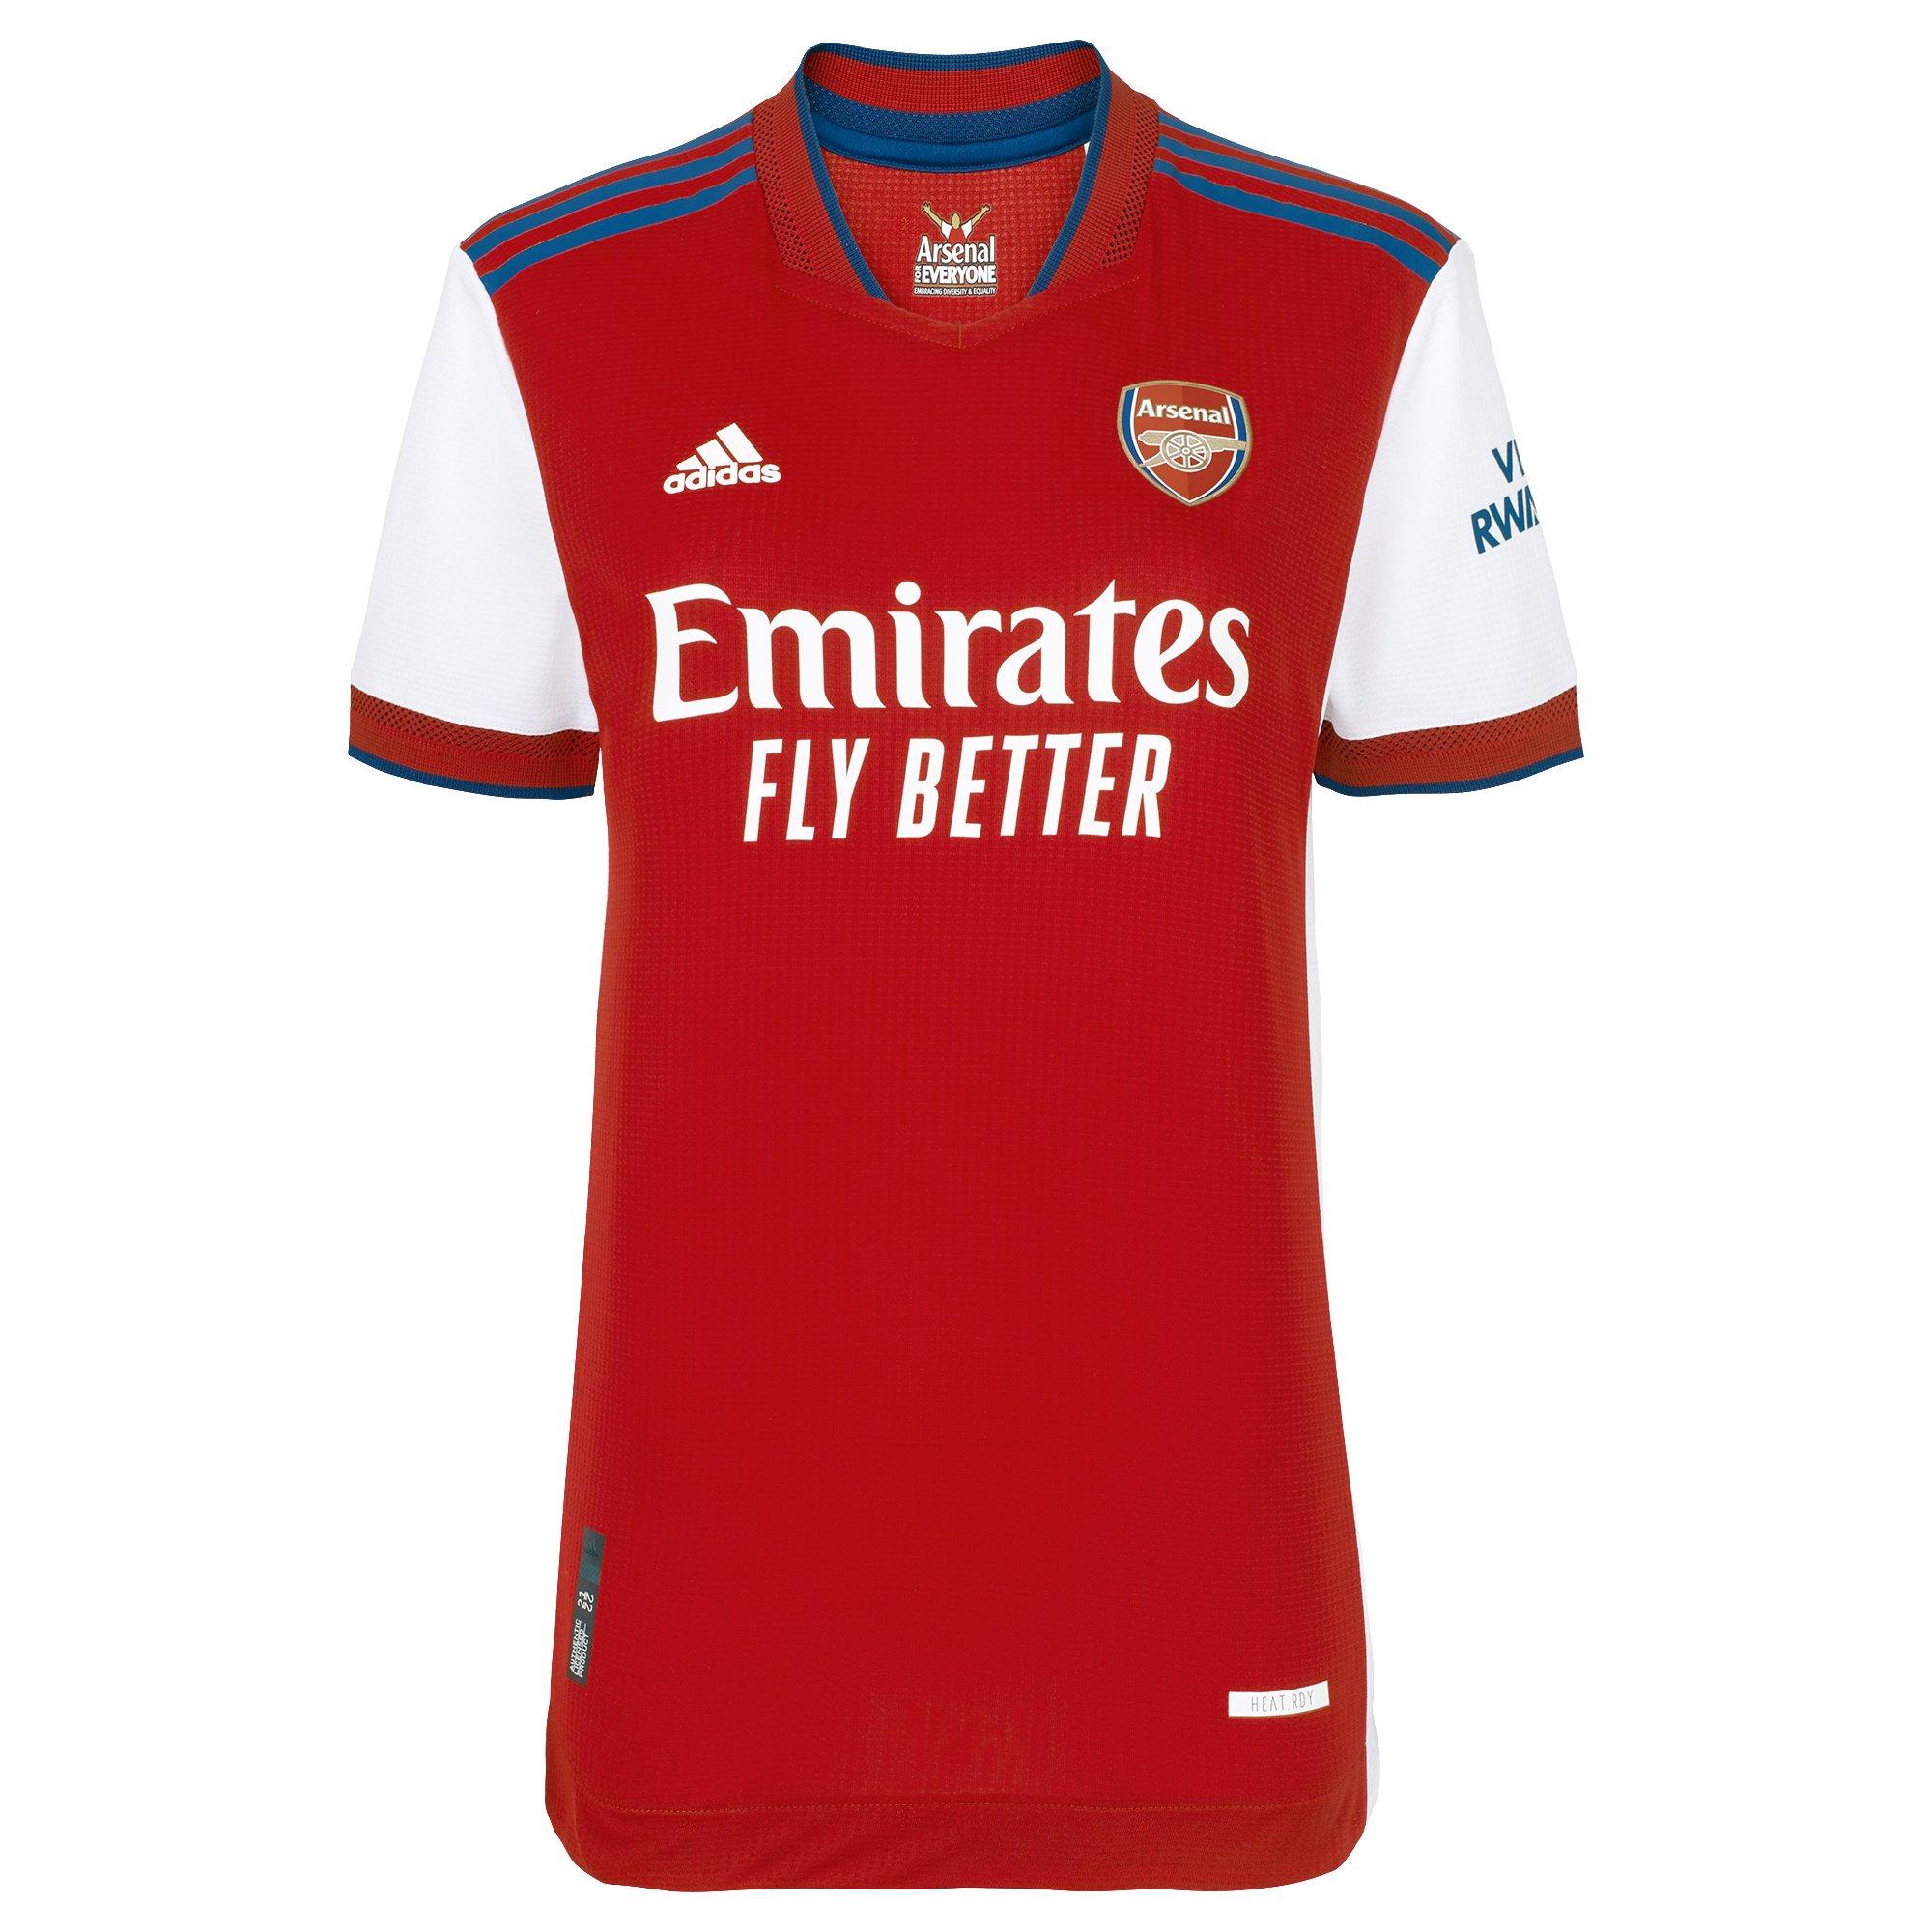 Arsenal Women's 21/22 Shirts | Official Online Store